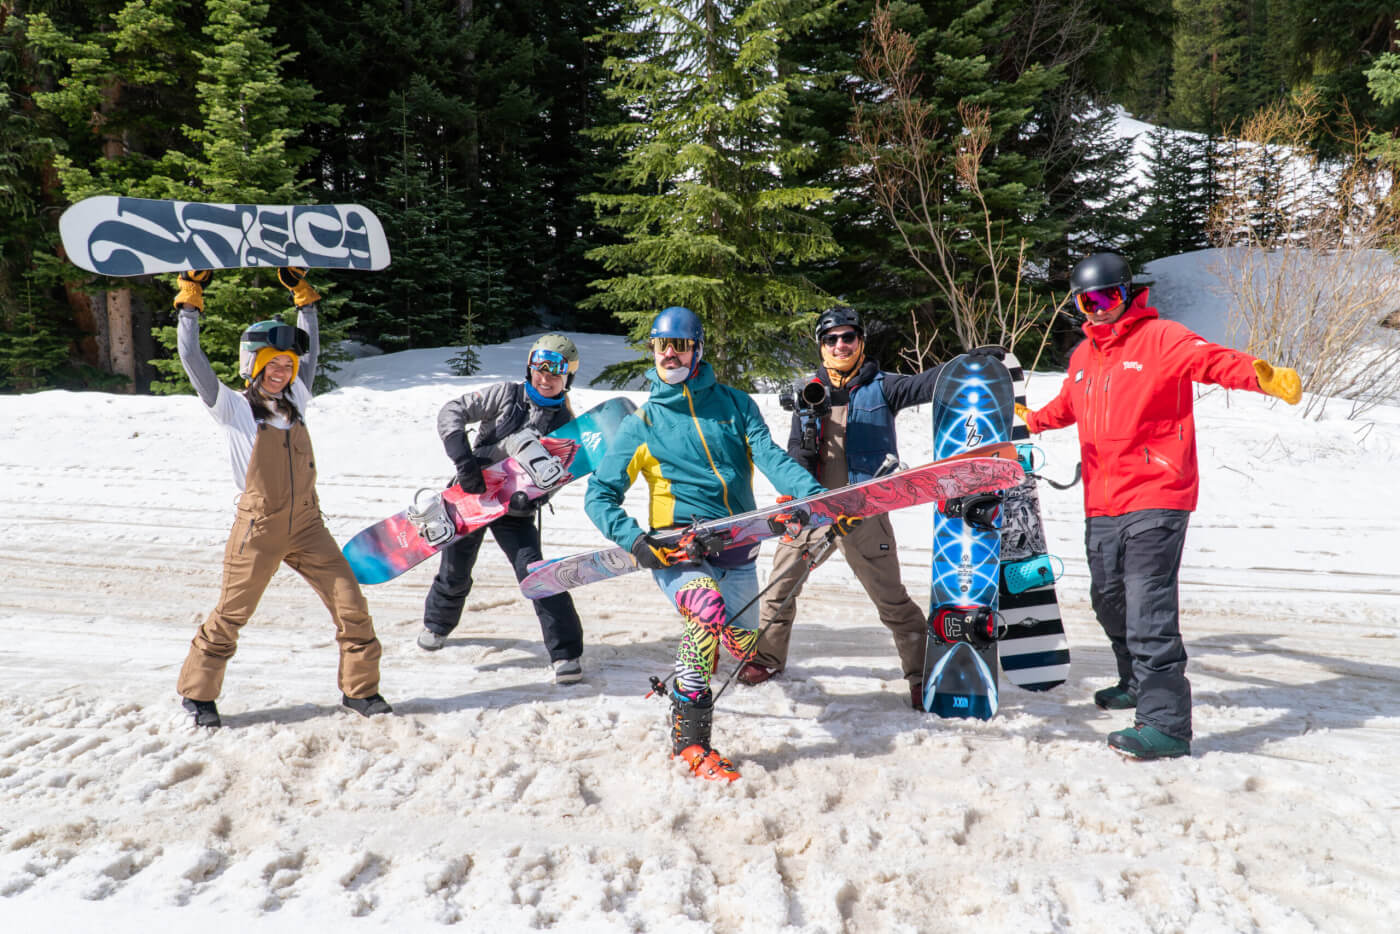 Group of skiers and snowboarders having fun in the snow.